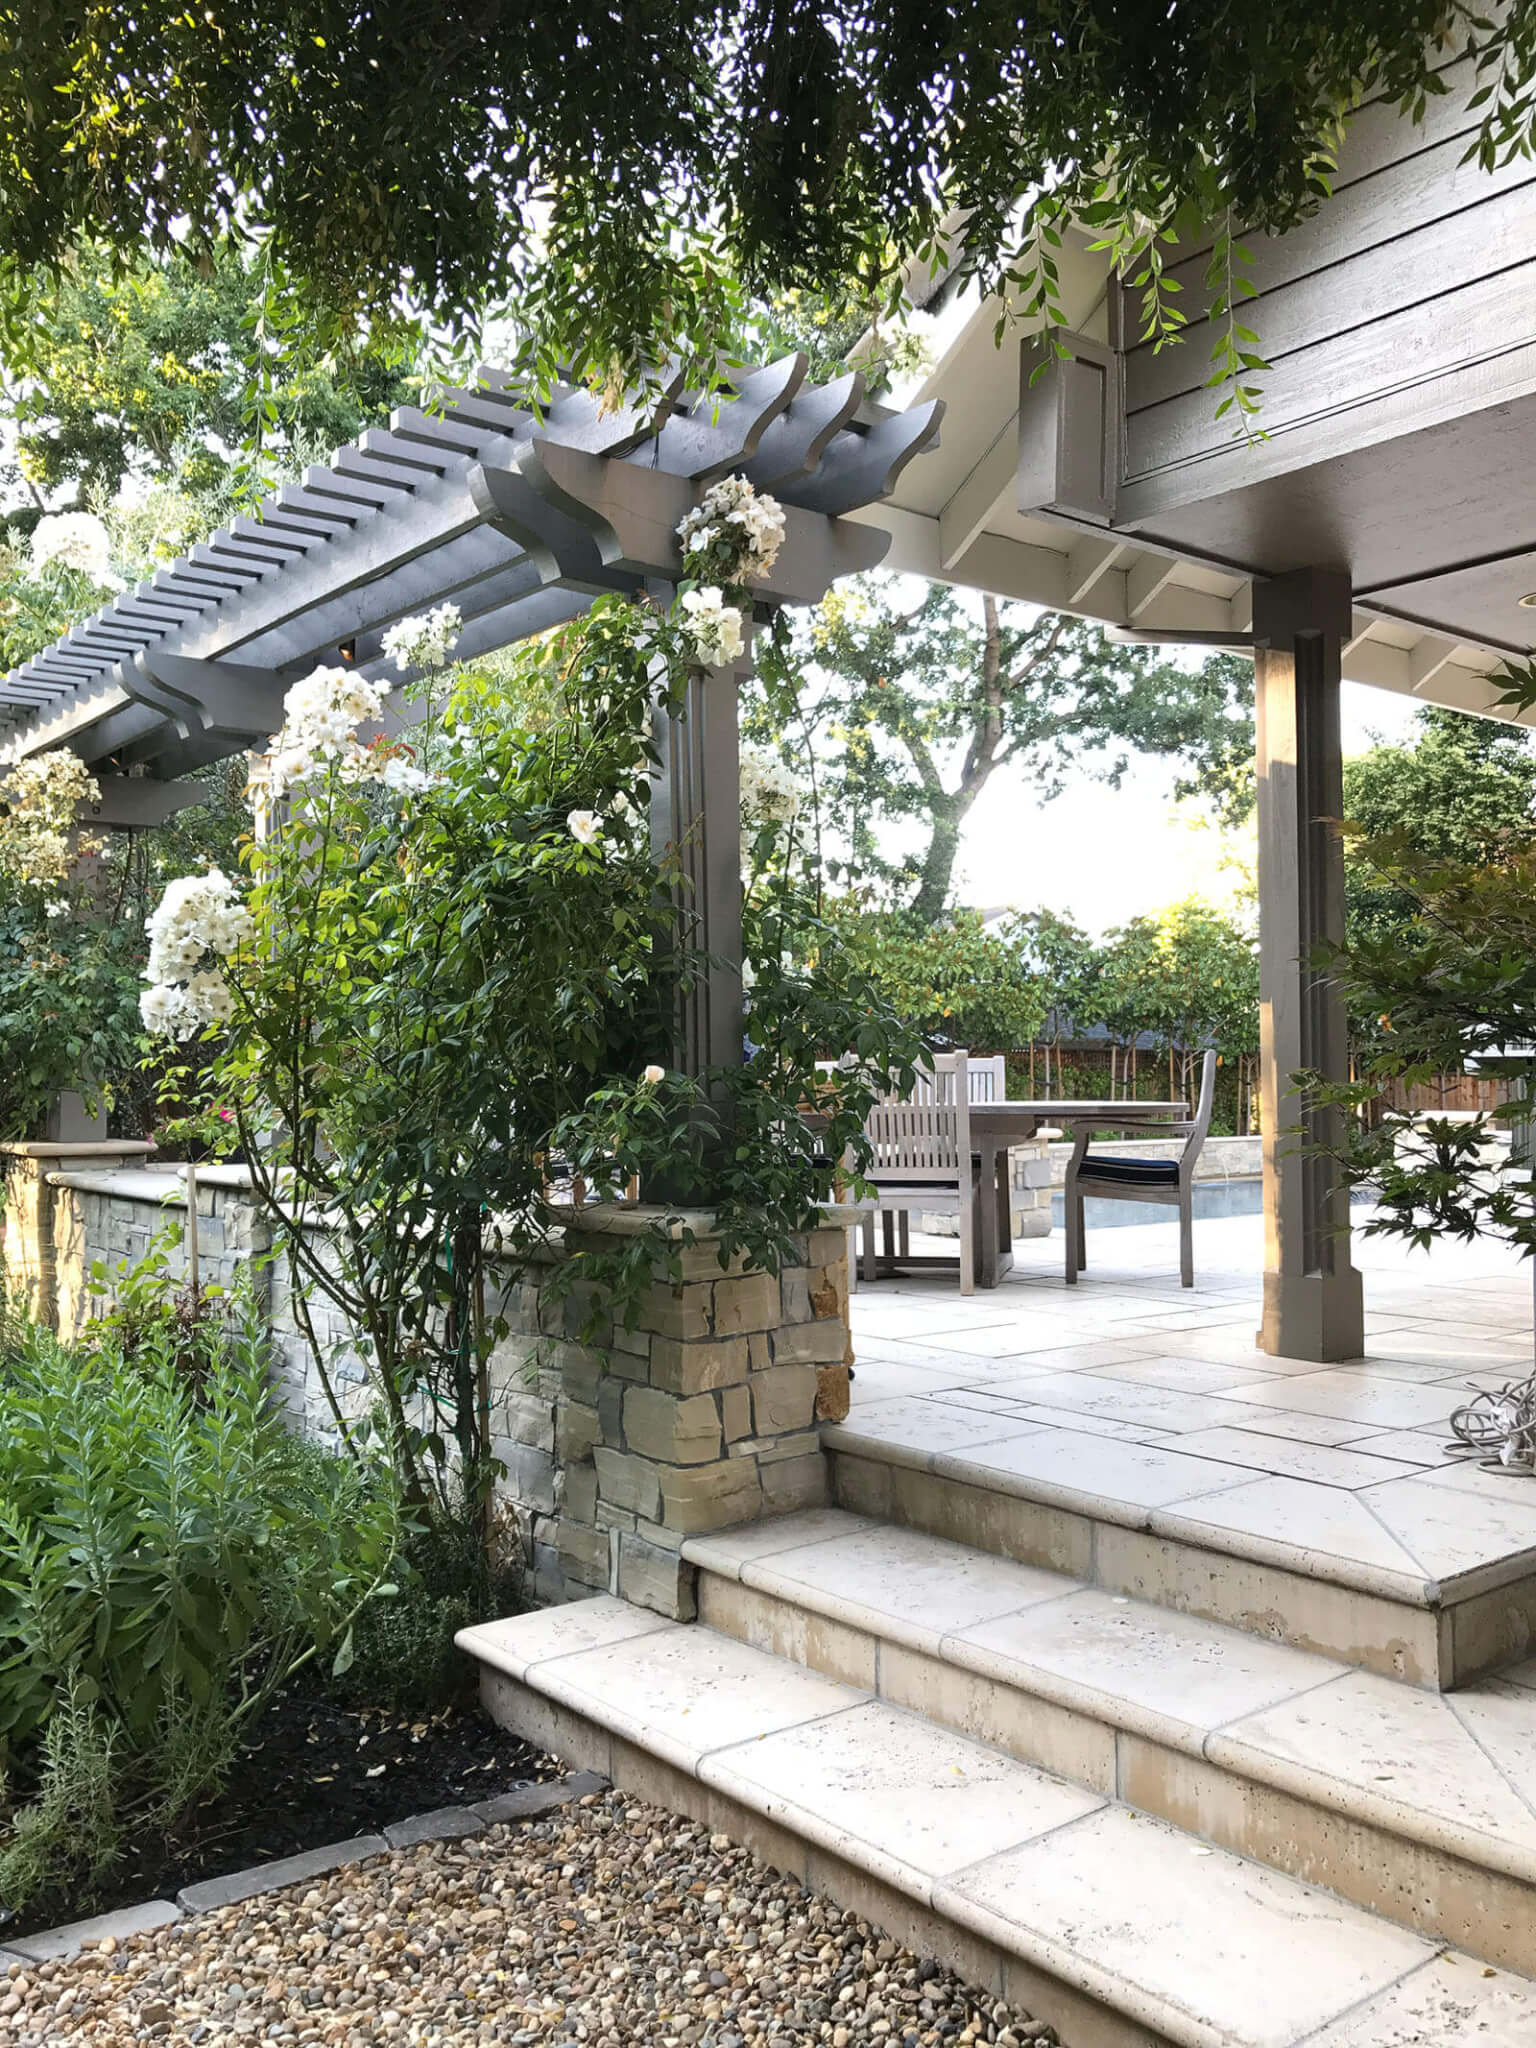 Raised stone tile patio with wrapping structures leading to gravel path below